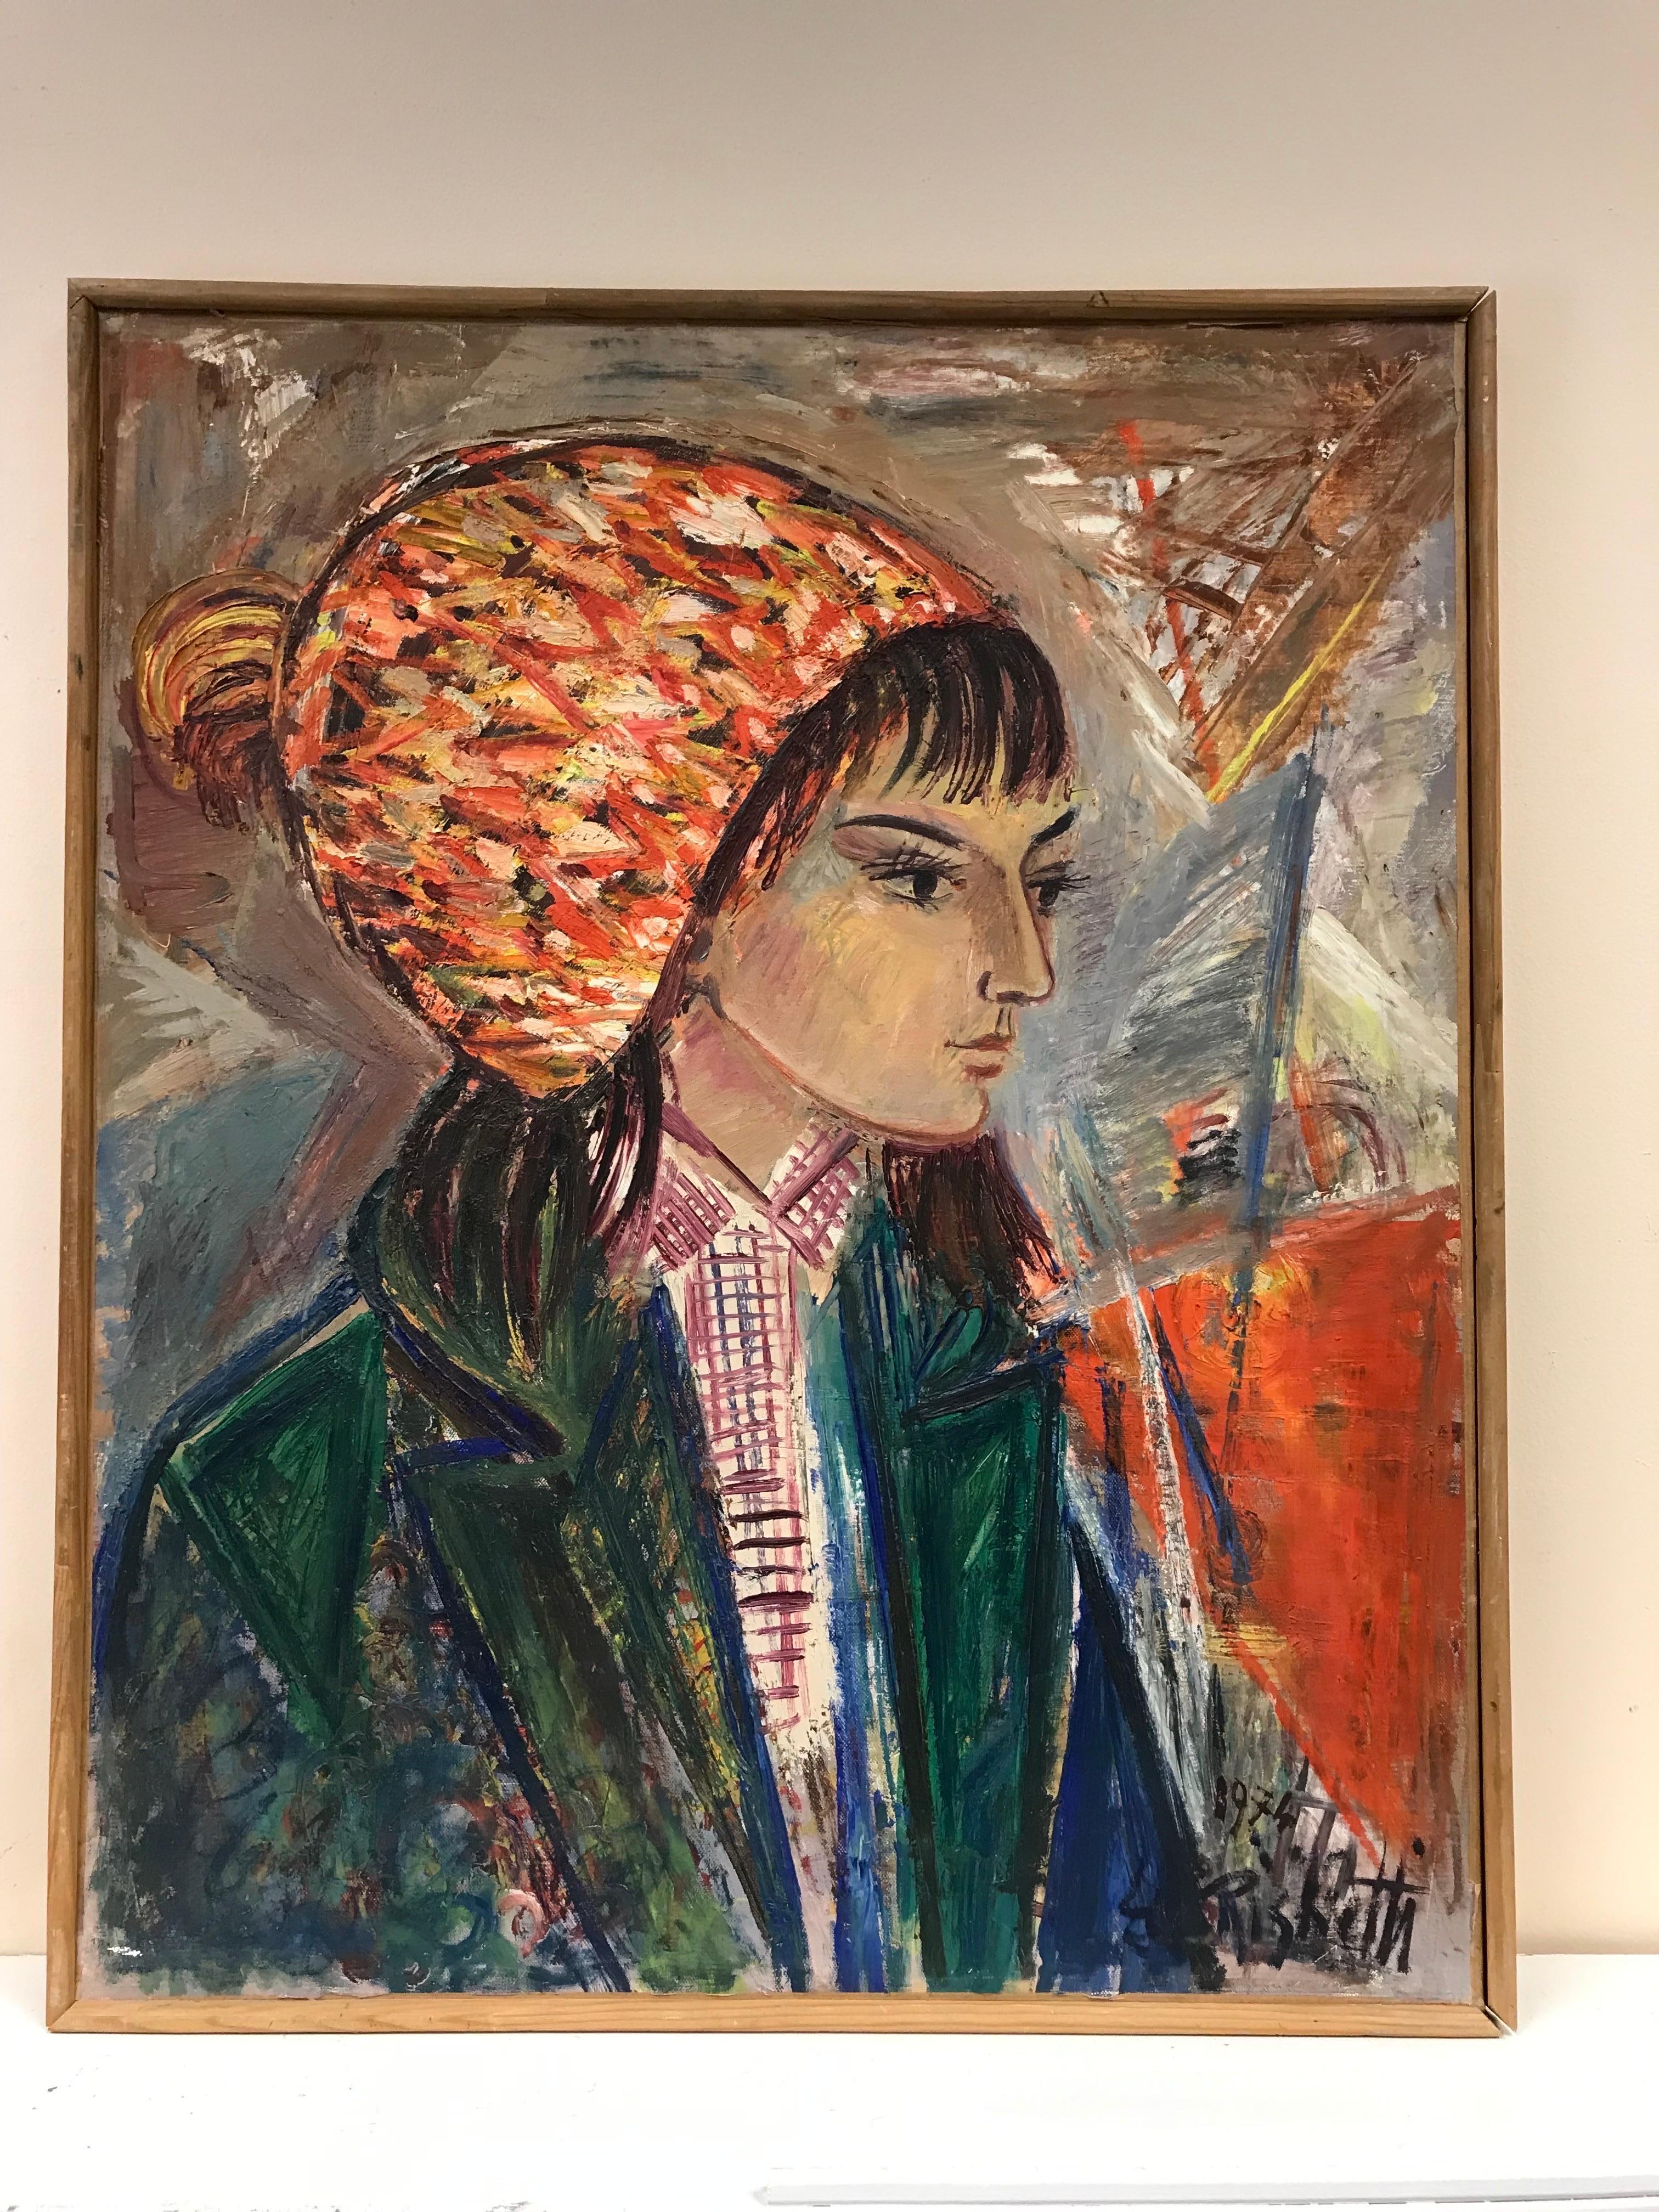 Stylish French Portrait Trendy Young Lady French 1970's Post-Impressionist Oil - Painting by Édouard Righetti (1924-2001)